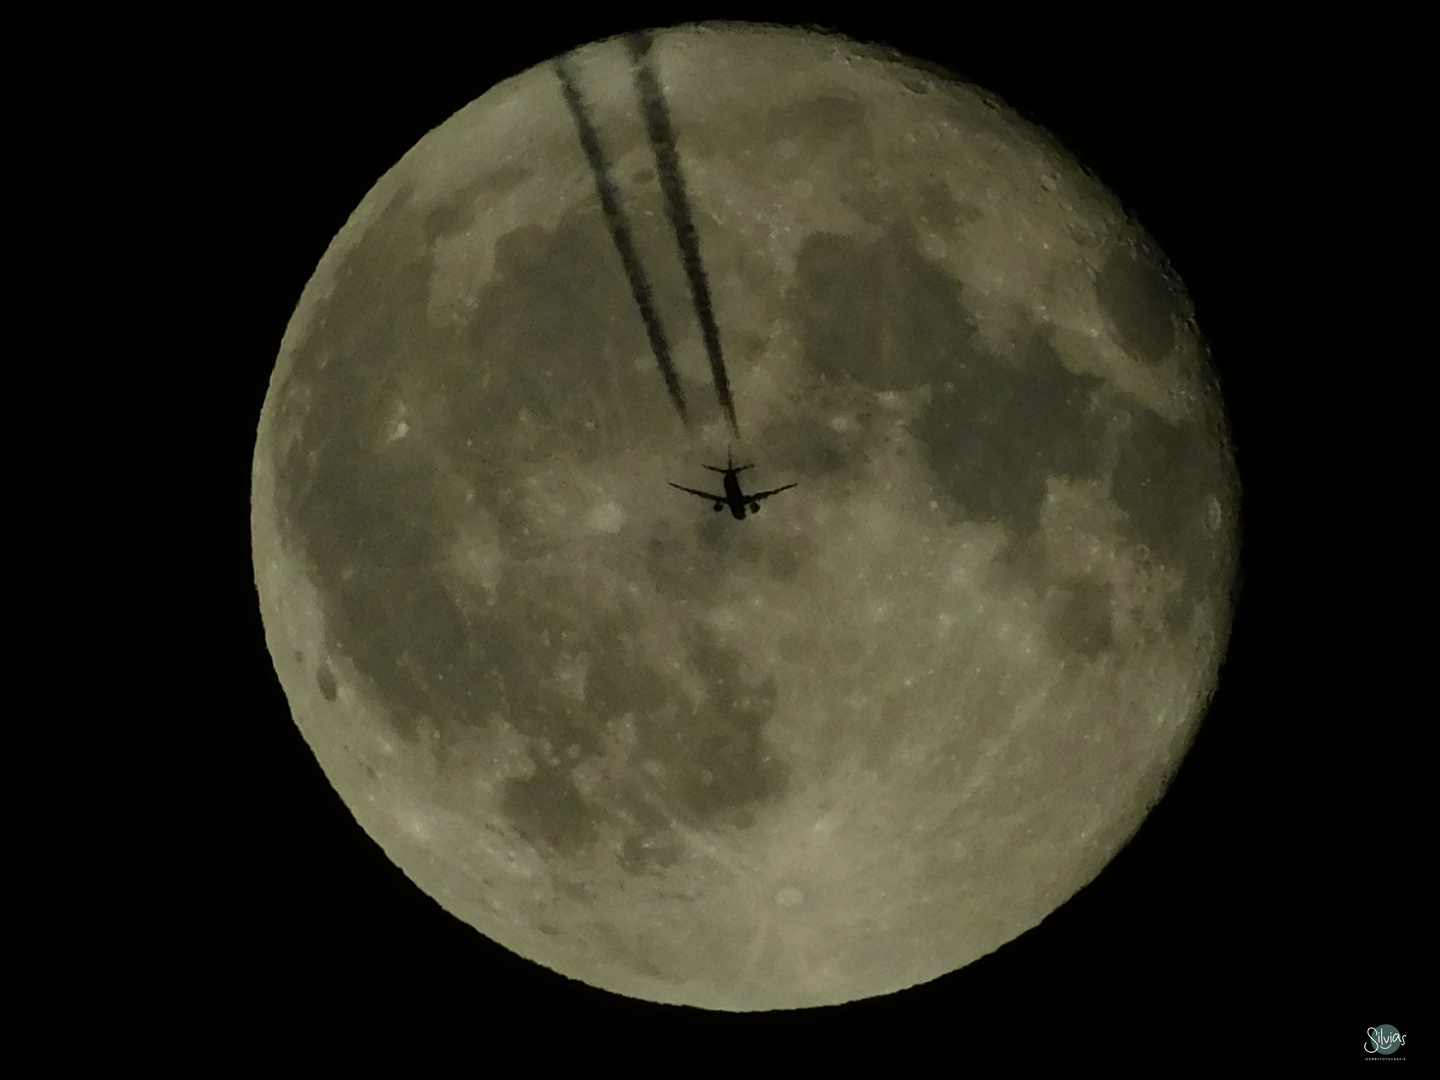 Fly me to the Moon and Back